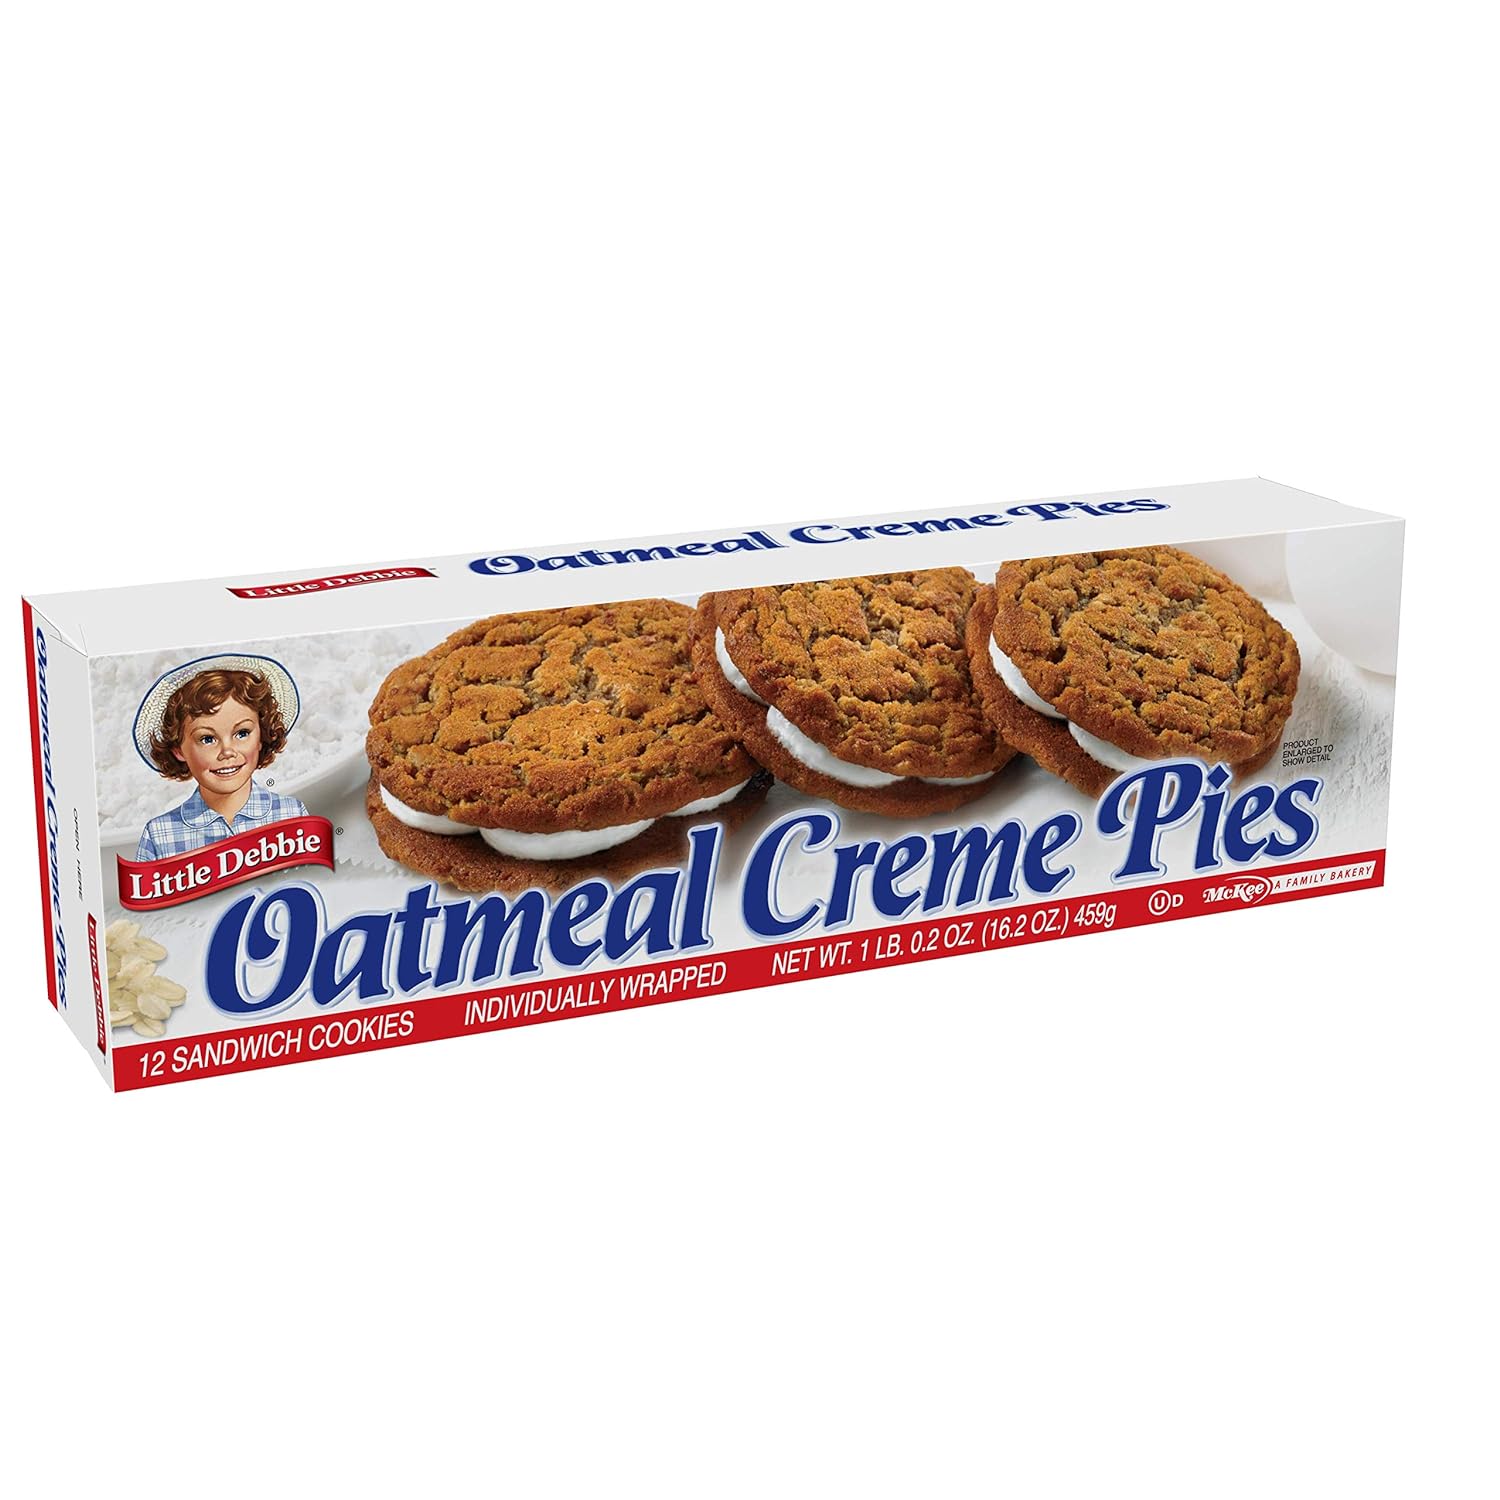 Little Debbie Oatmeal Creme Pies, 12 Individually Wrapped creme pies, 16.2 Ounces, Pack of One (1)